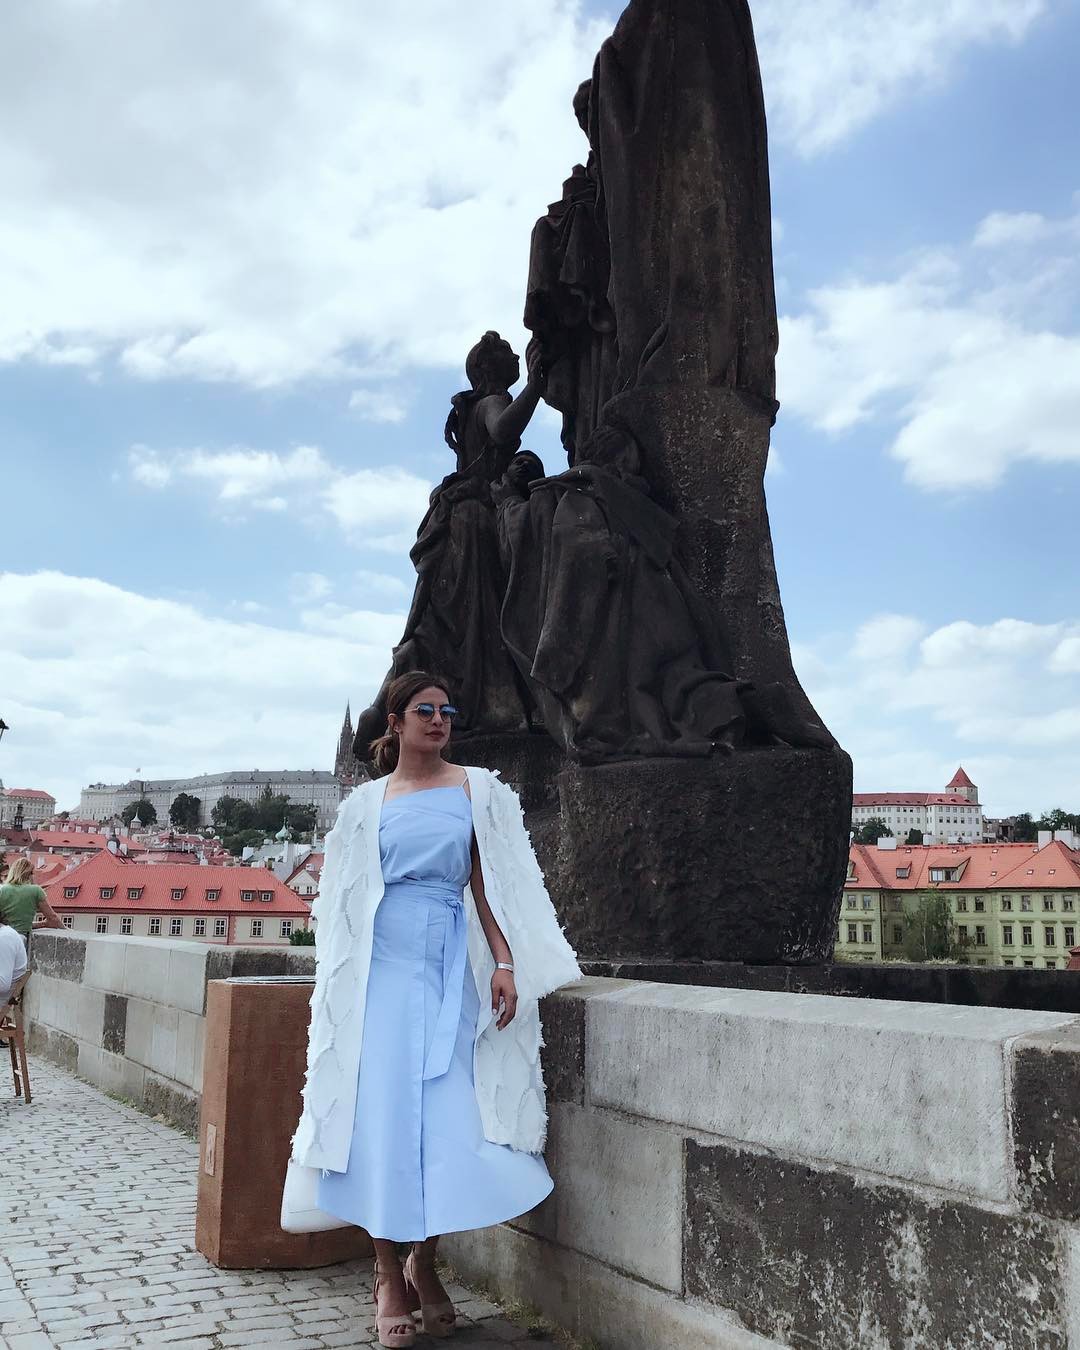 Priyanka’s Prague pictures are giving us vacation goals